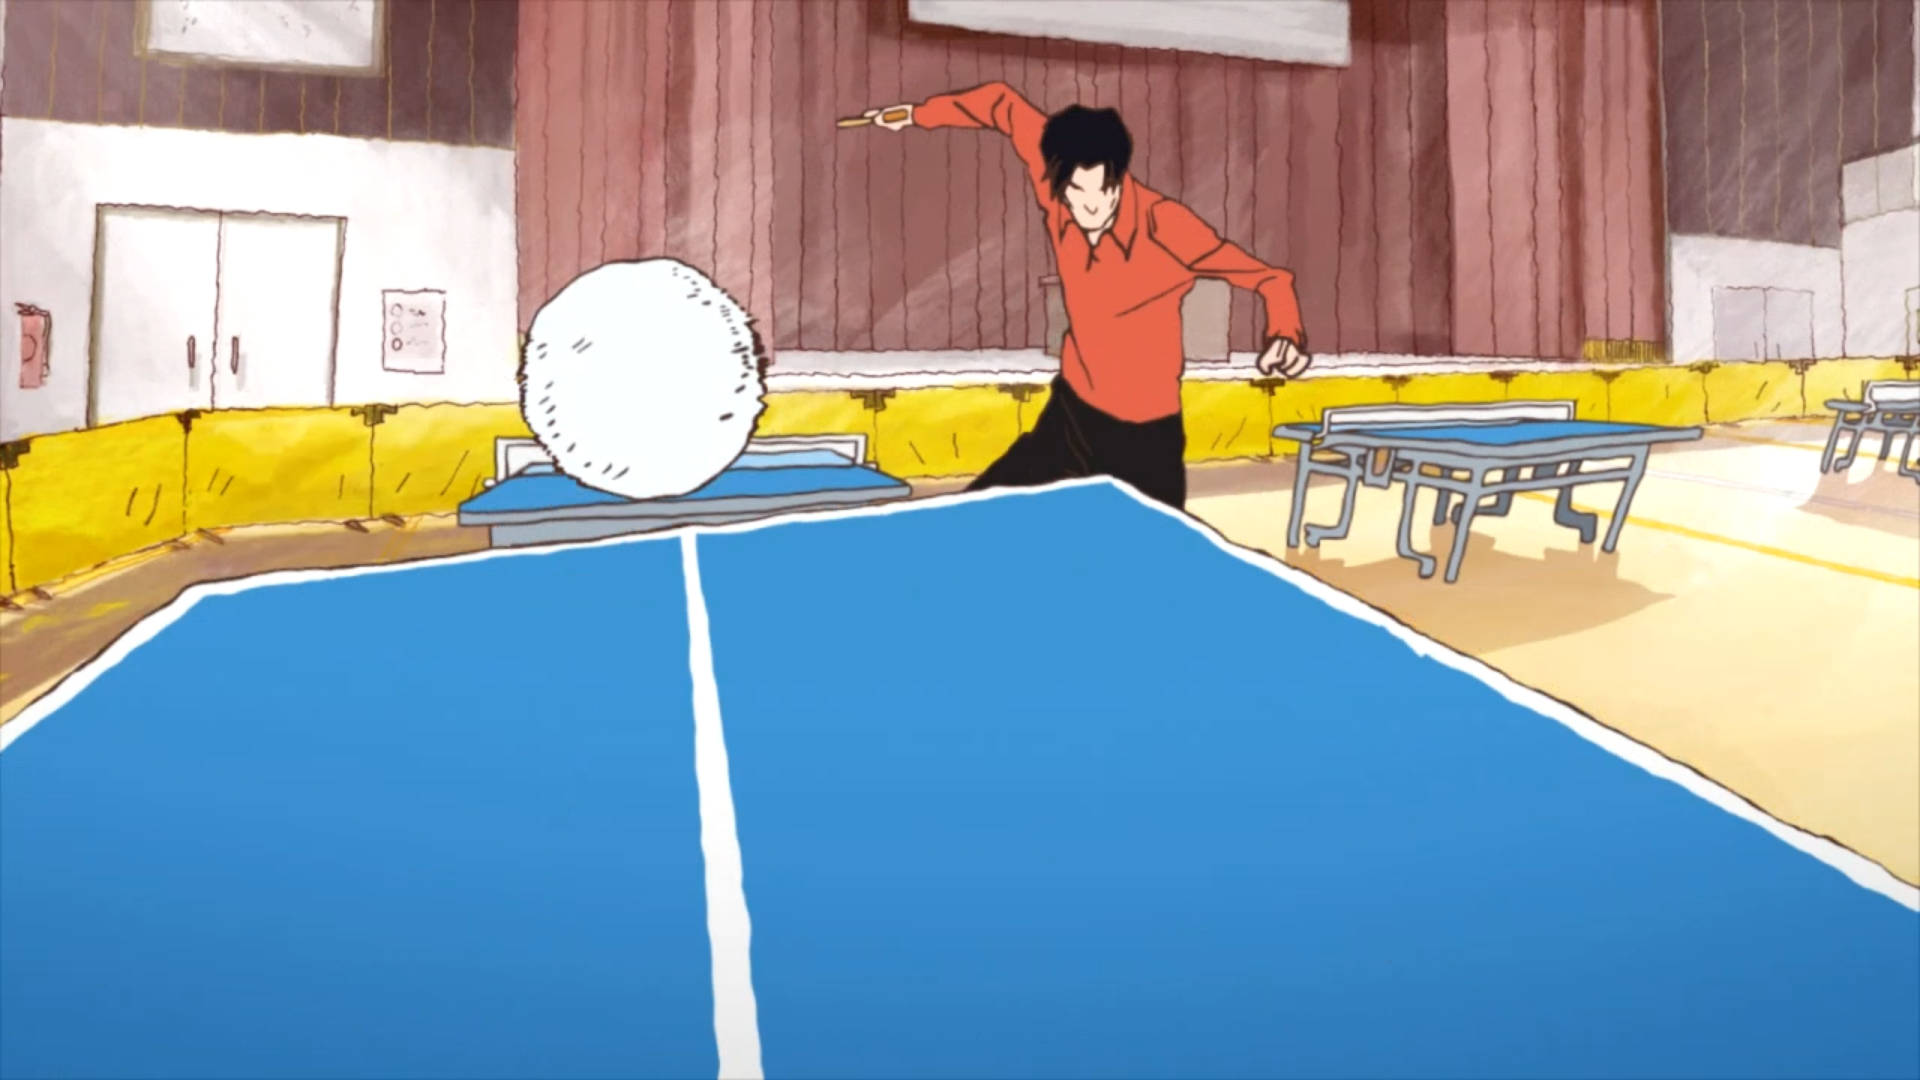 Epic Moment In Table Tennis Championship Background